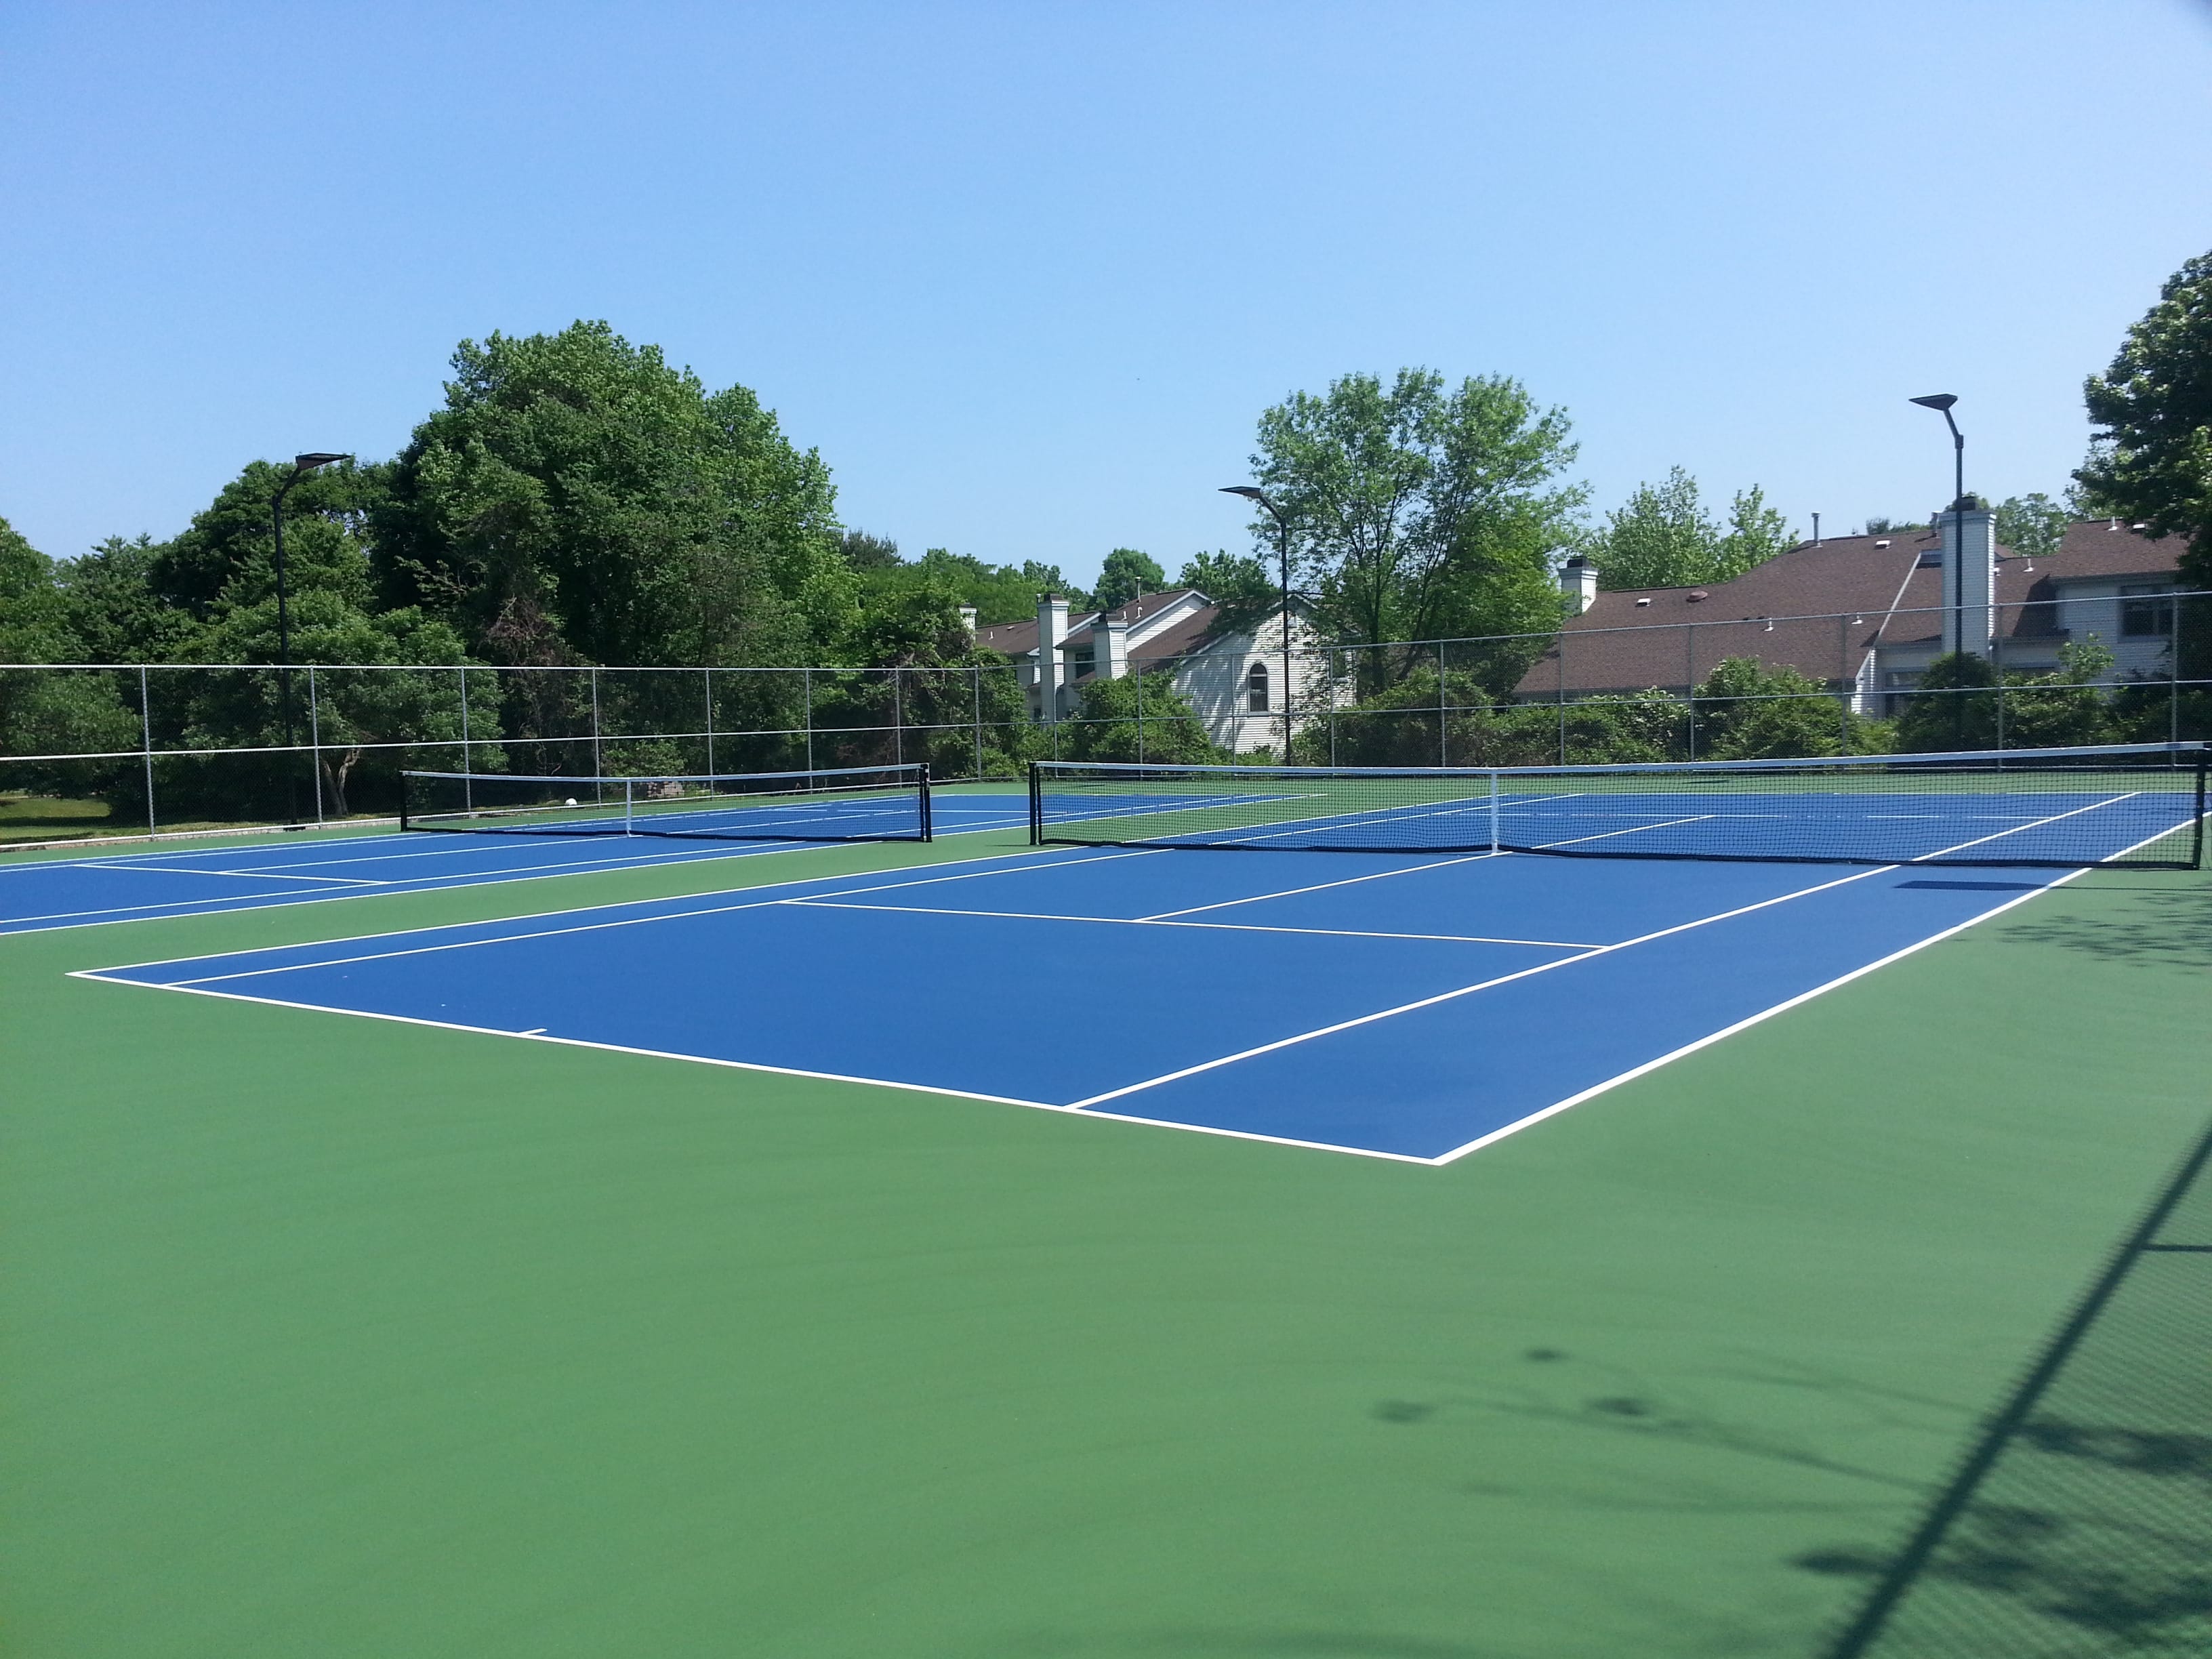 The Manor at Wayside in Ocean has two tennis courts.